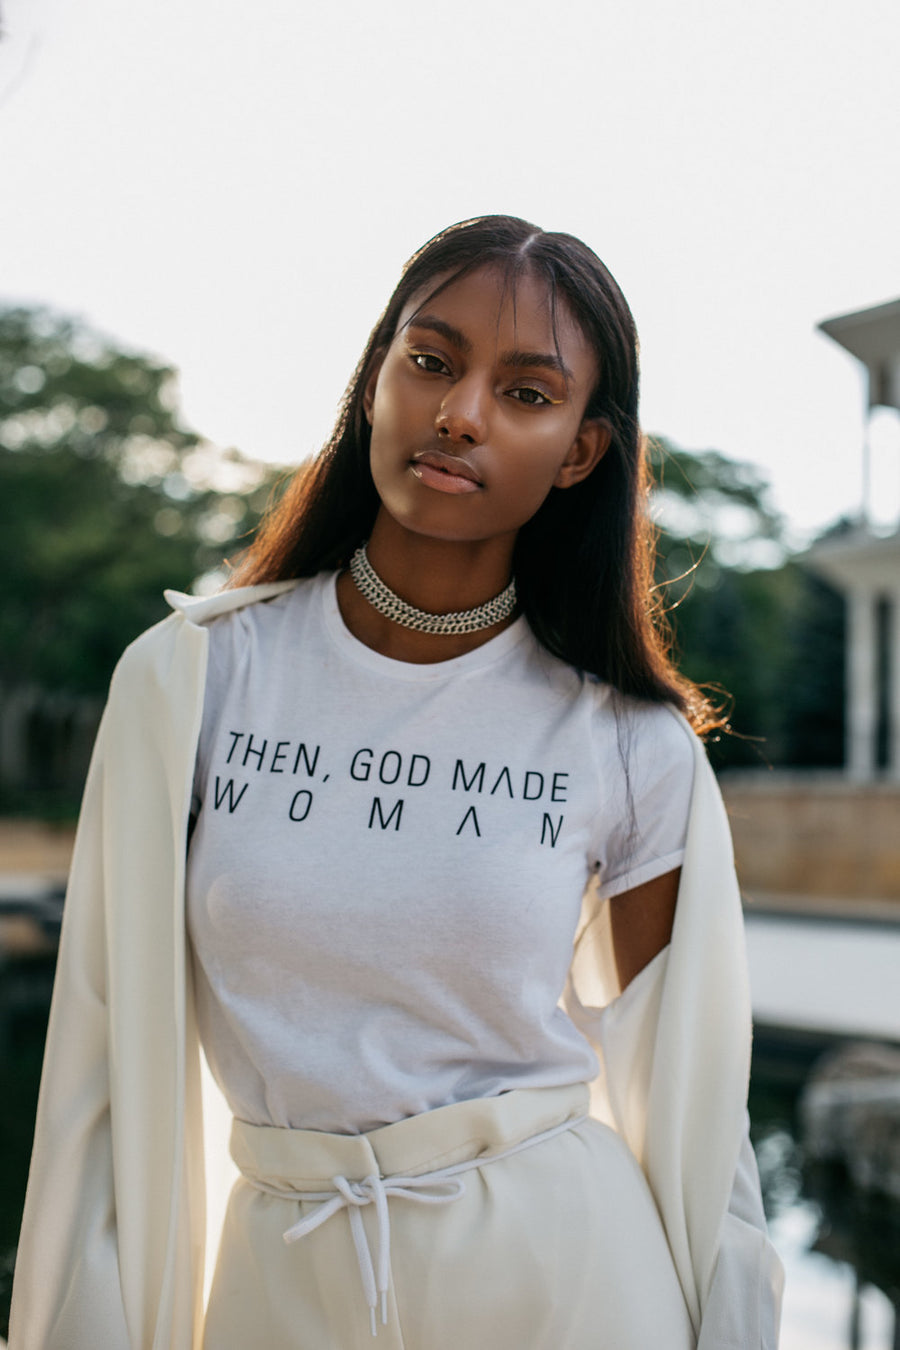 Then, God Made Woman Tee - White